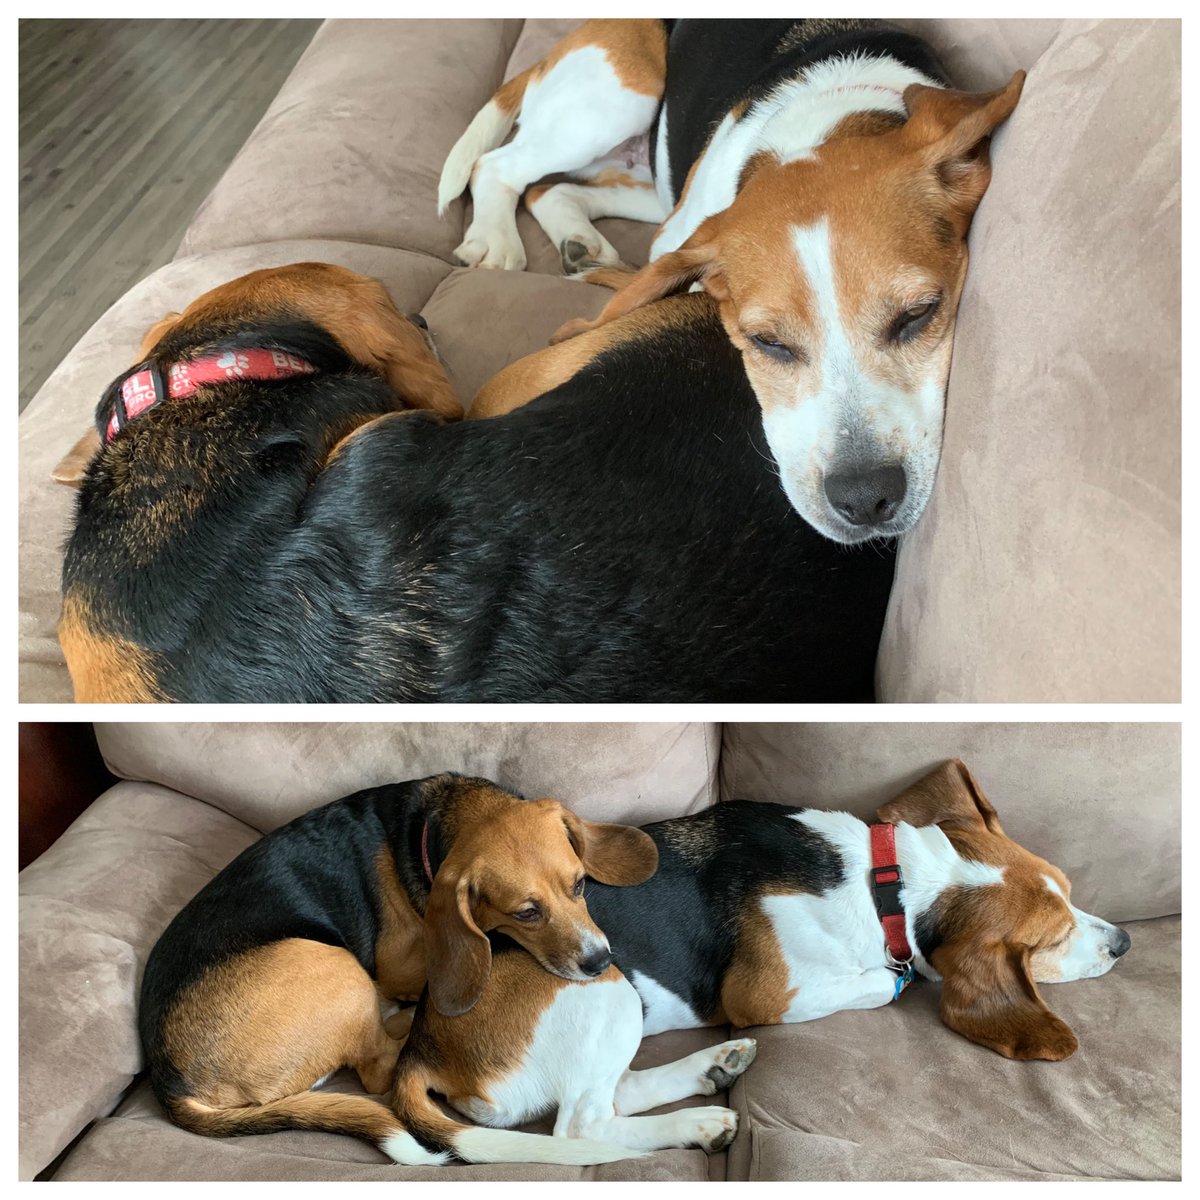 Beagle siblings make the best pillows. Always grateful to @beaglefreedom for making these moments possible. 🐶🐶😴❤️ #beagle #animaltestingsurvivors #beaglefreedomproject #dogsoftwitter #rescuebeagle #rescuedogs #freedomrocks #livingourbestlives